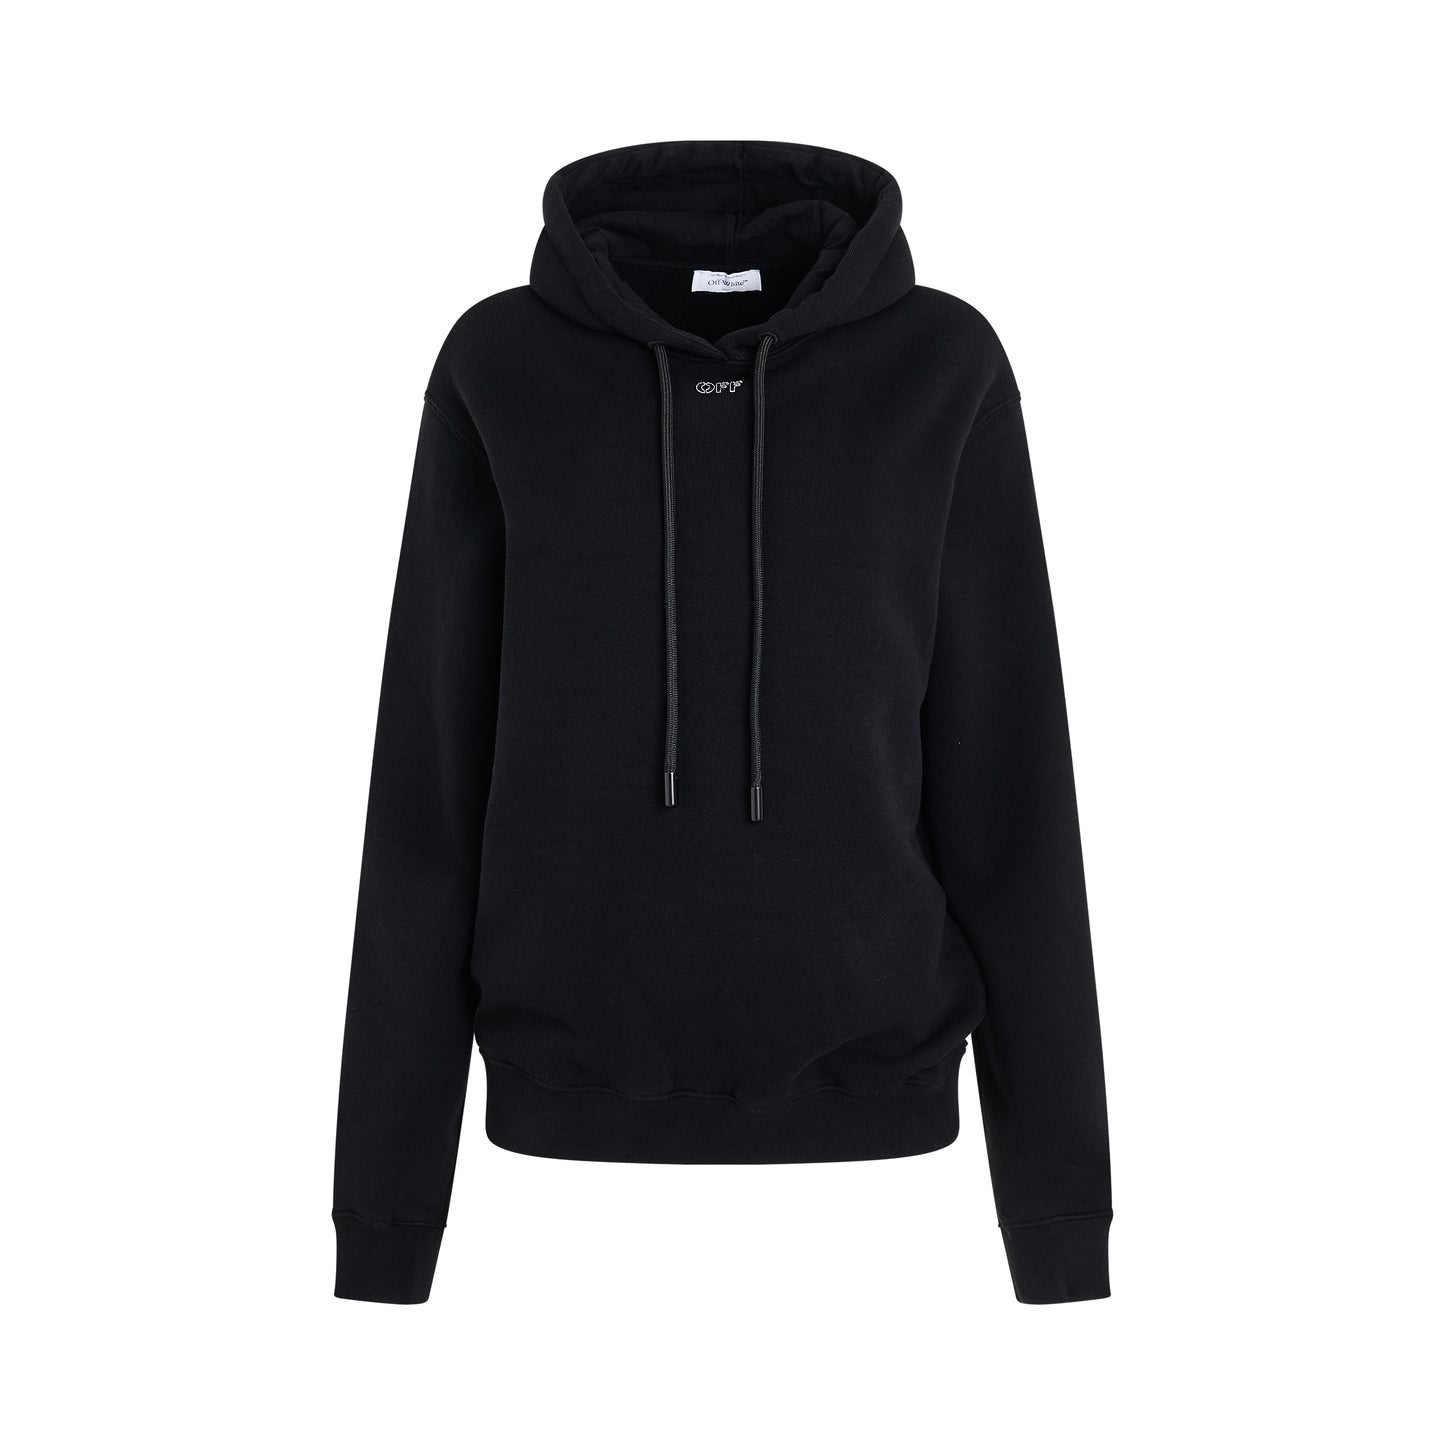 Embroidered Stitch Arrow Regular Fit Hoodie in Black